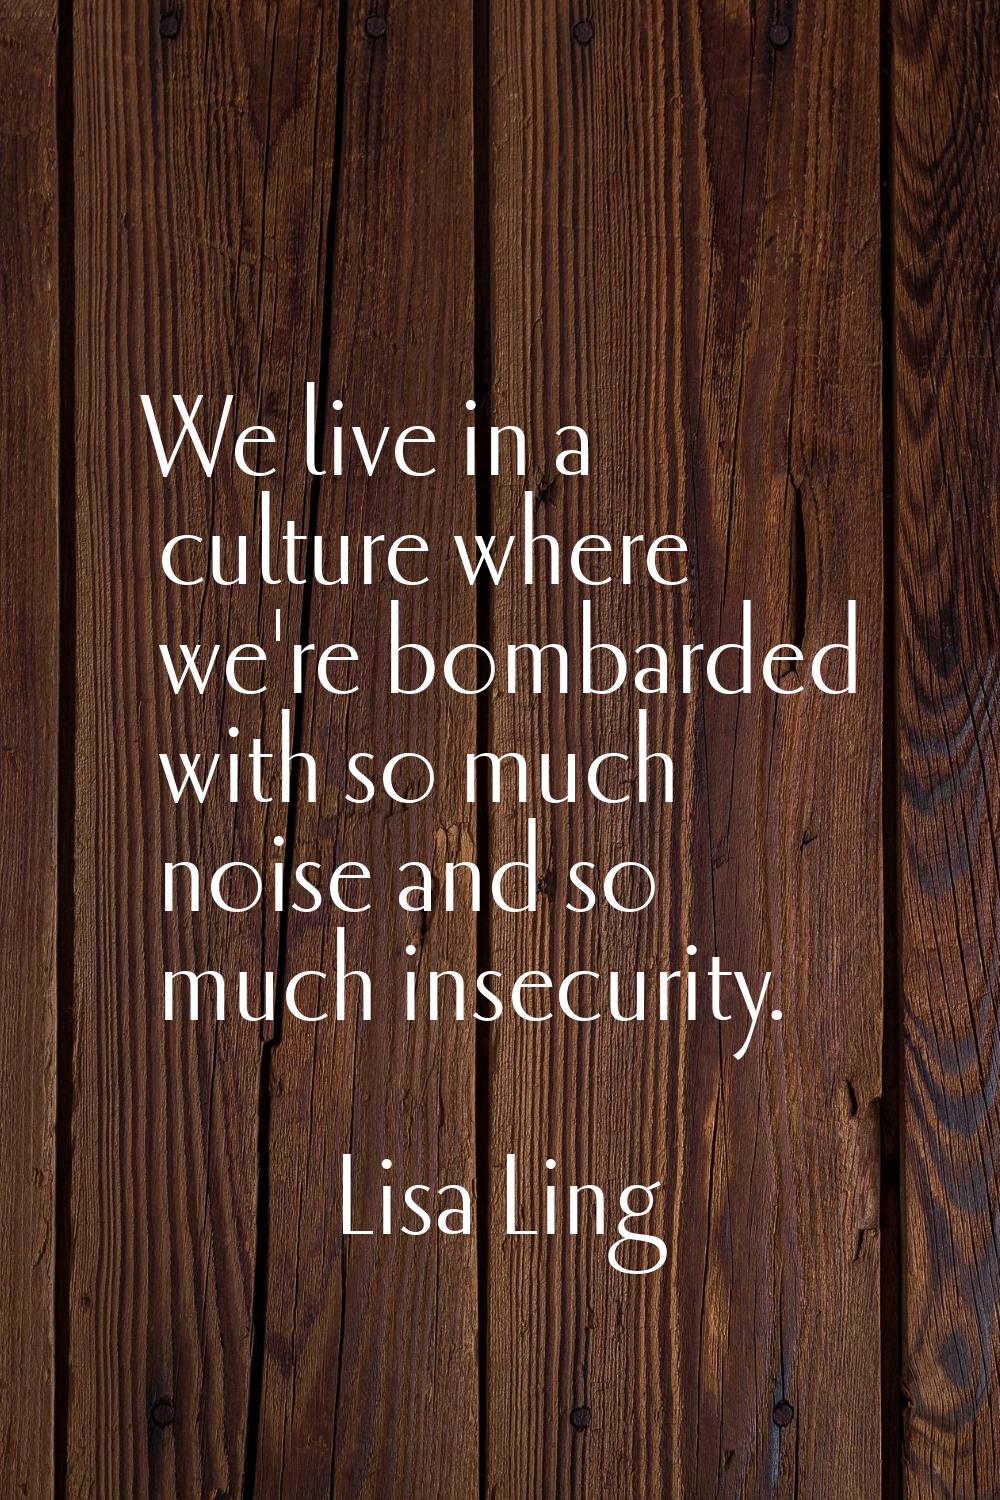 We live in a culture where we're bombarded with so much noise and so much insecurity.